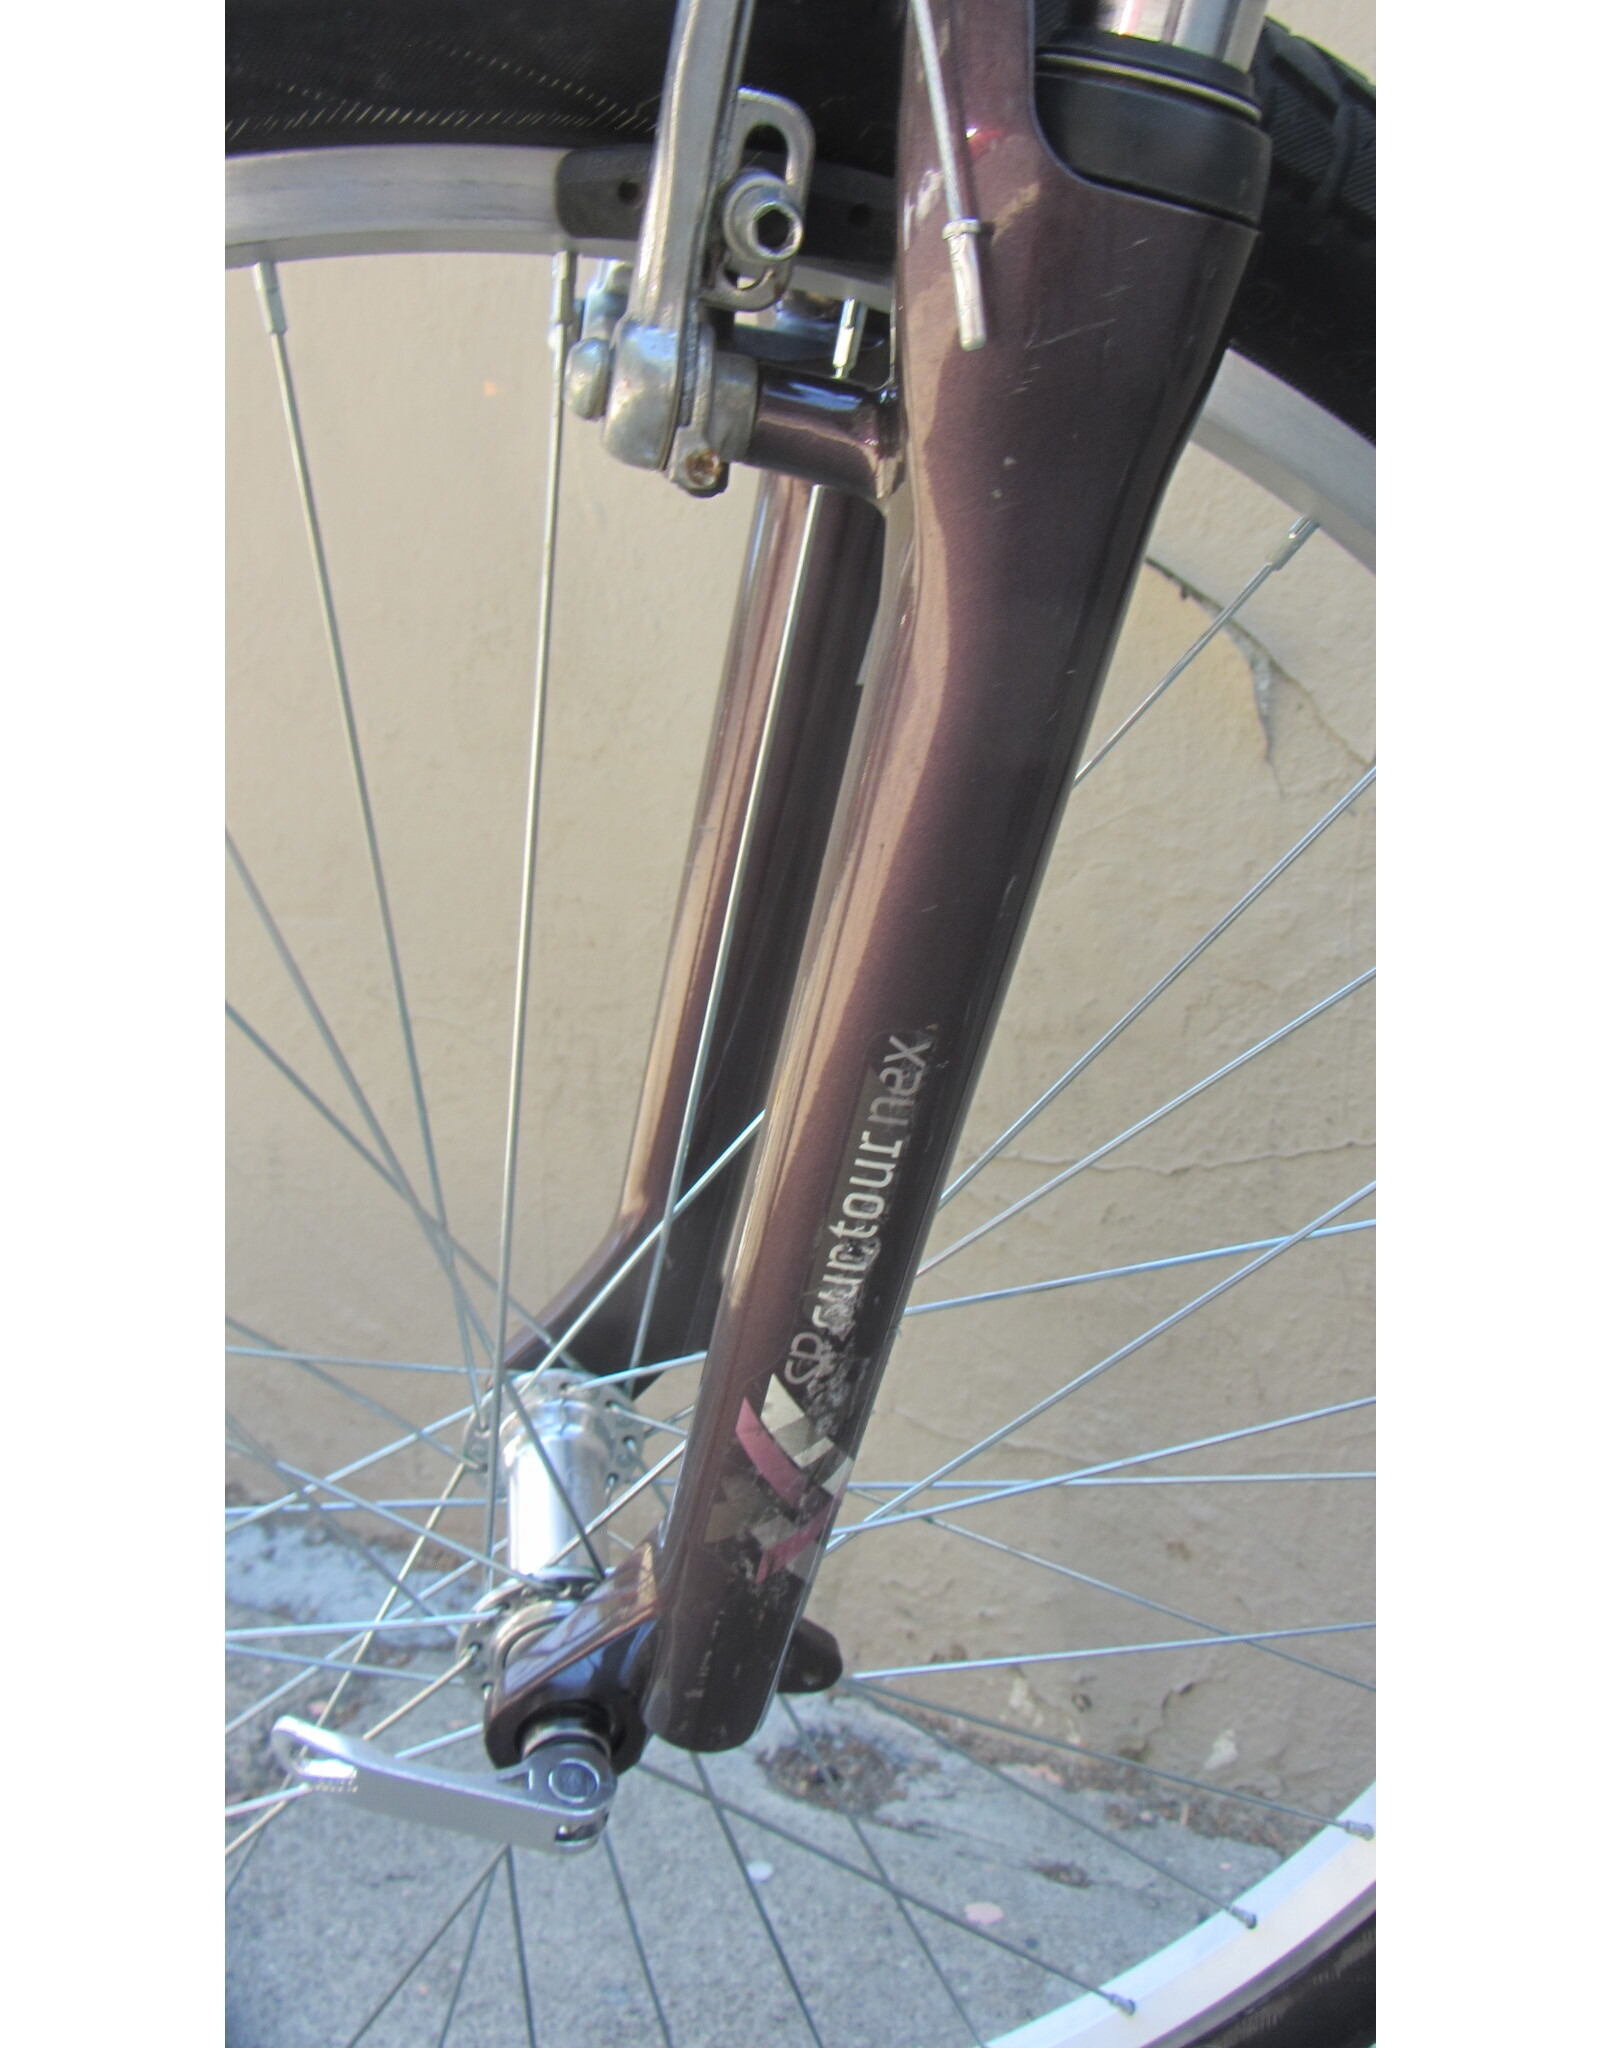 Raleigh Raleigh Venture 3.0, 2014, 17 Inches, Burgundy